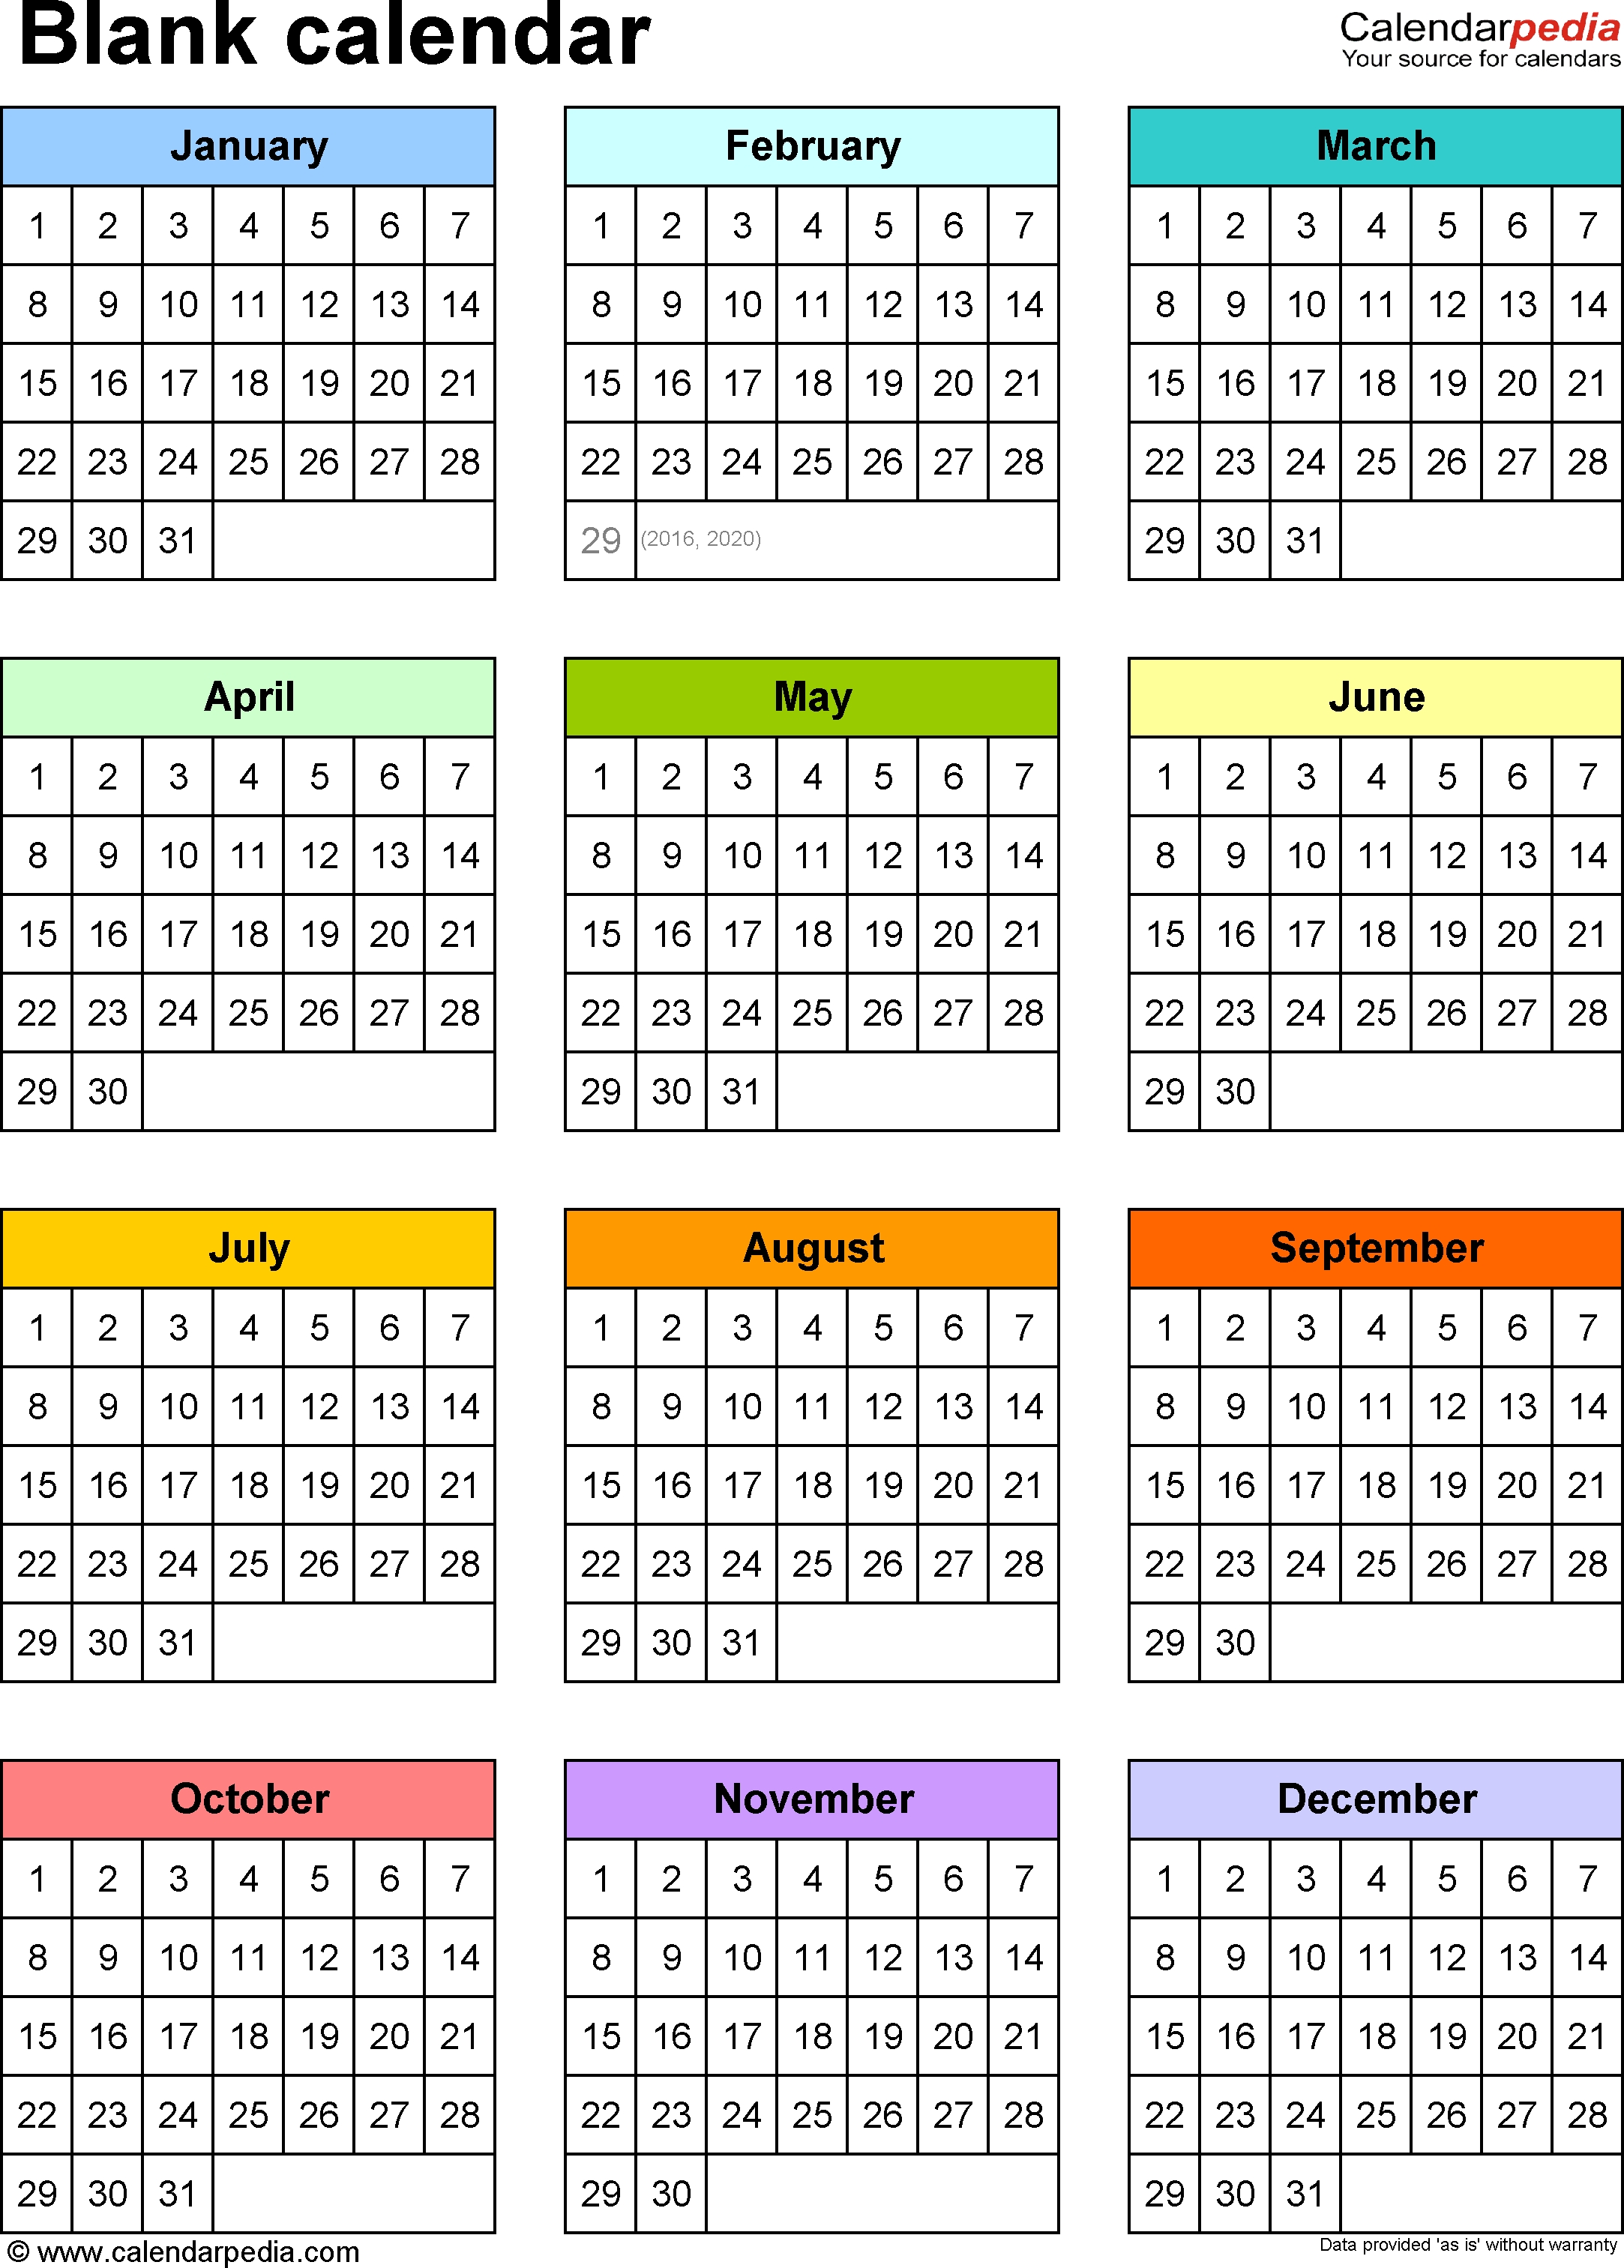 Month At A Glance Blank Calendar Template - Wpa.wpart.co-Month At A Glance Blank Calendar